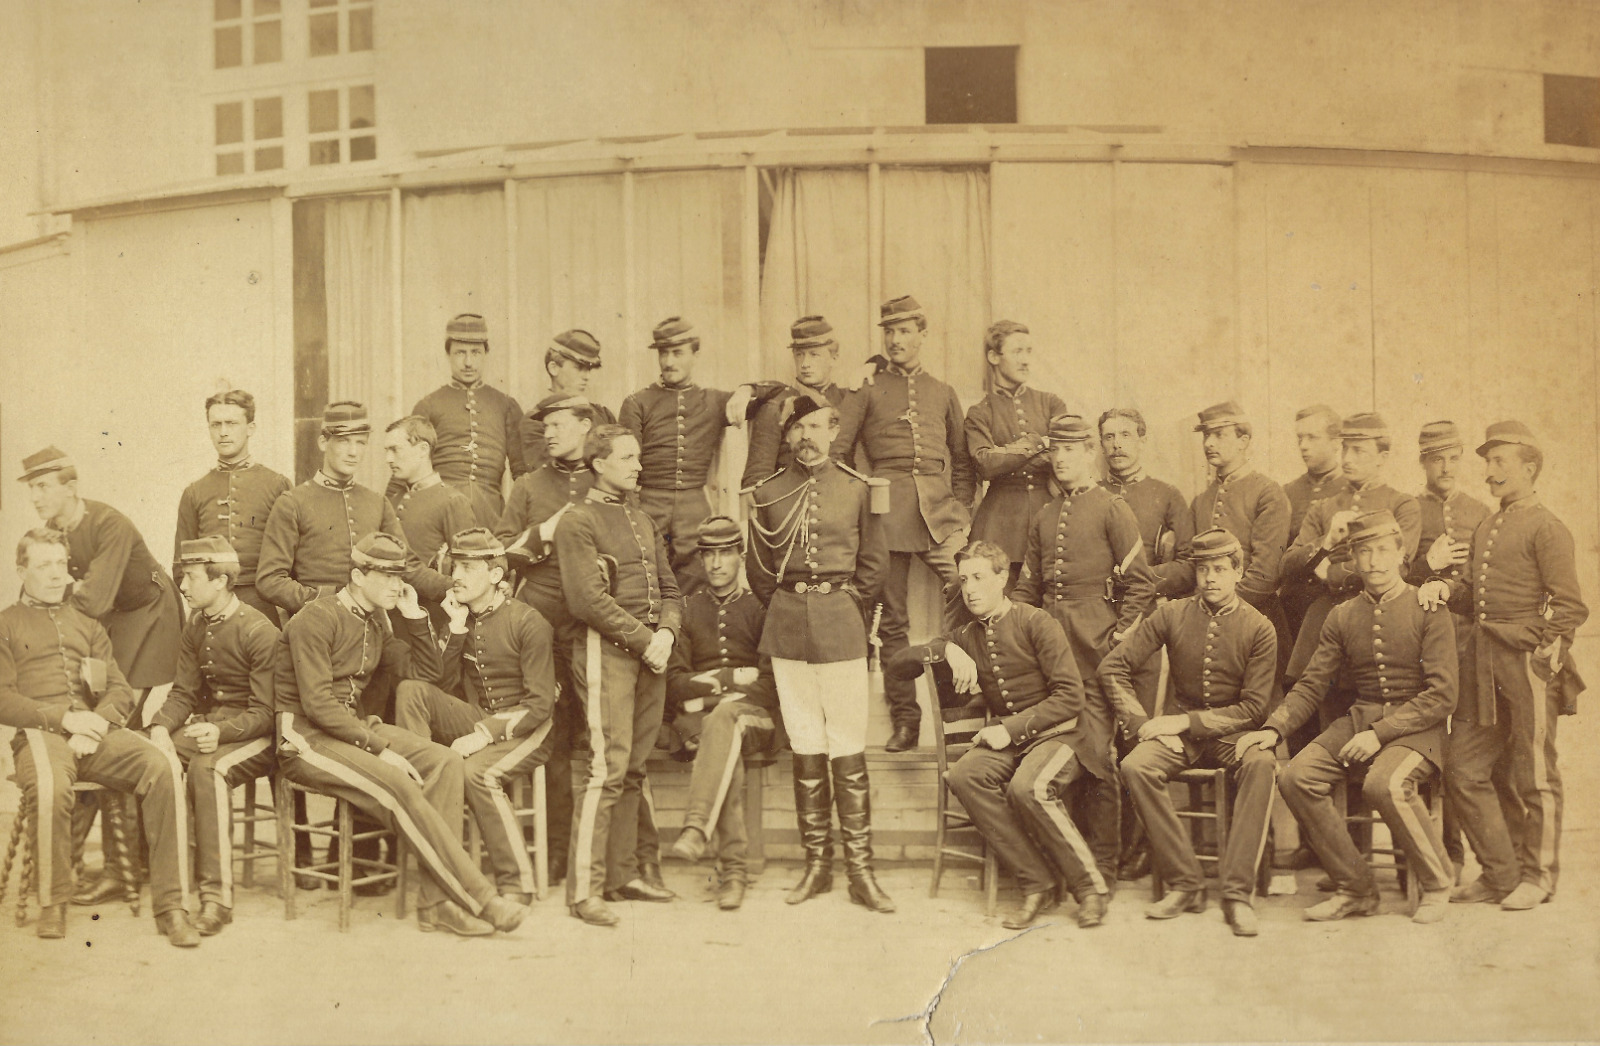 Photo of students Ecole militaire Saint-Cyr & their instructor ca 1865 Frank Paris